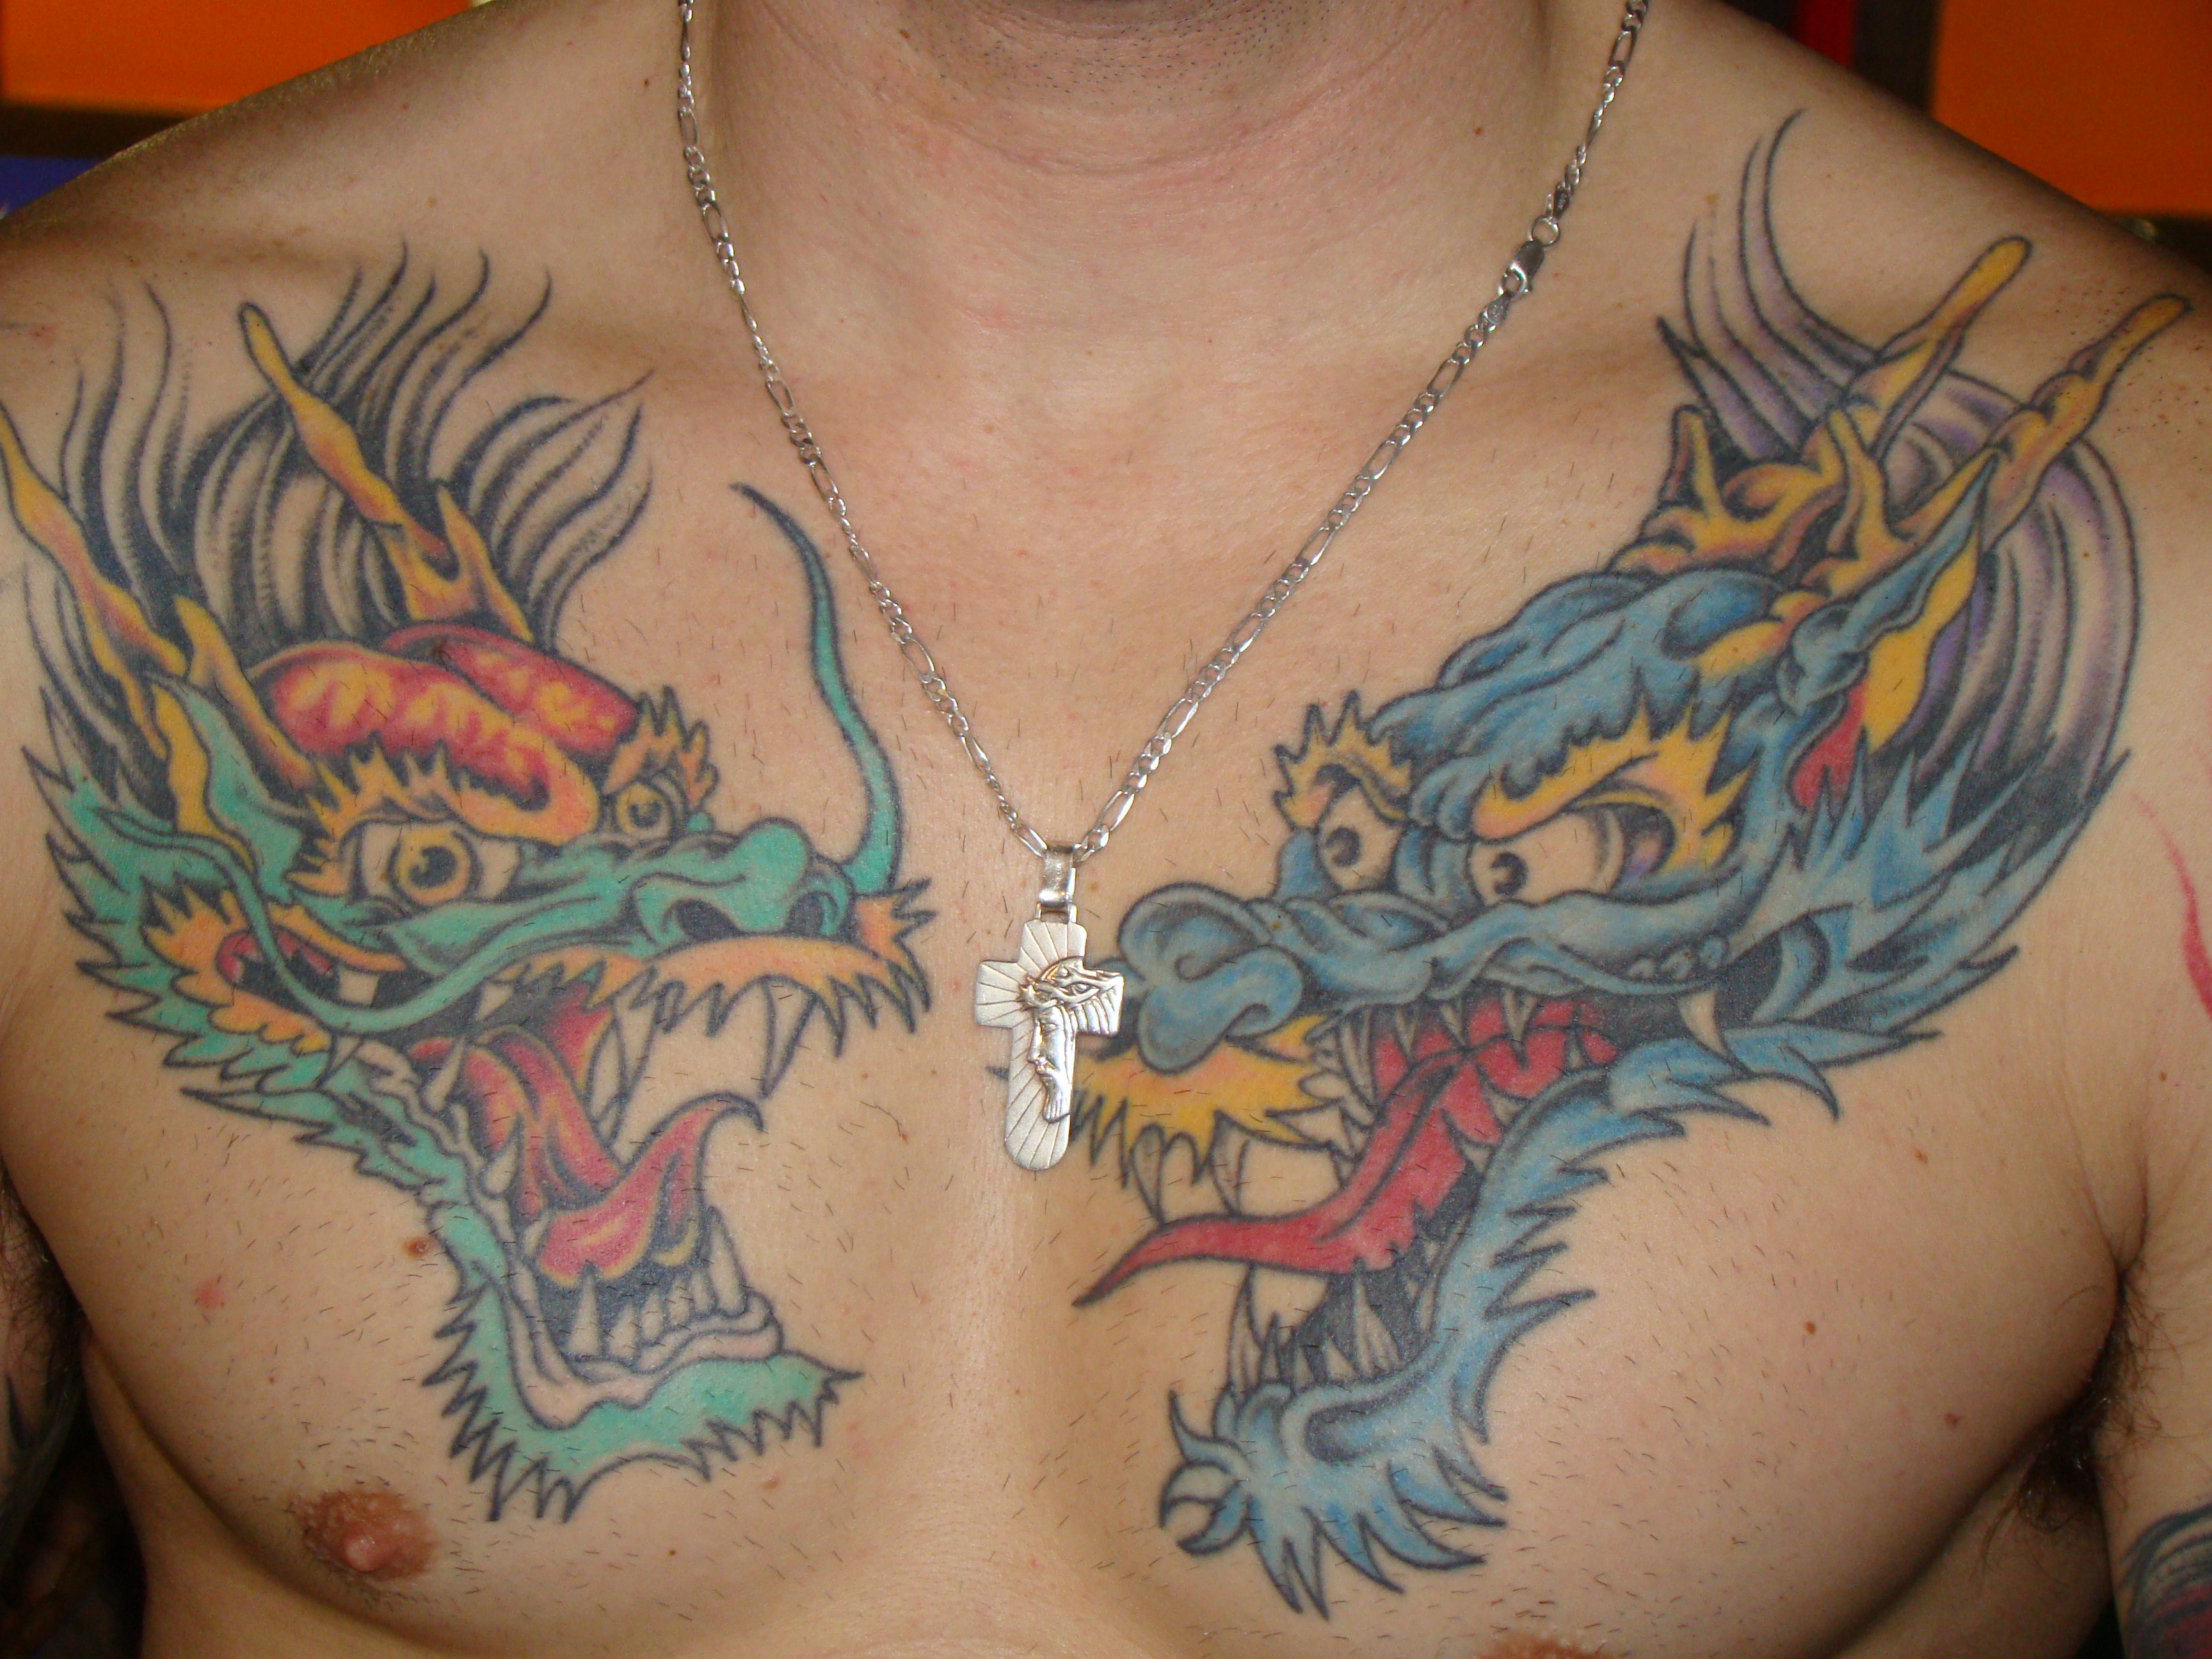 2 Dragons On Chest Tattoos